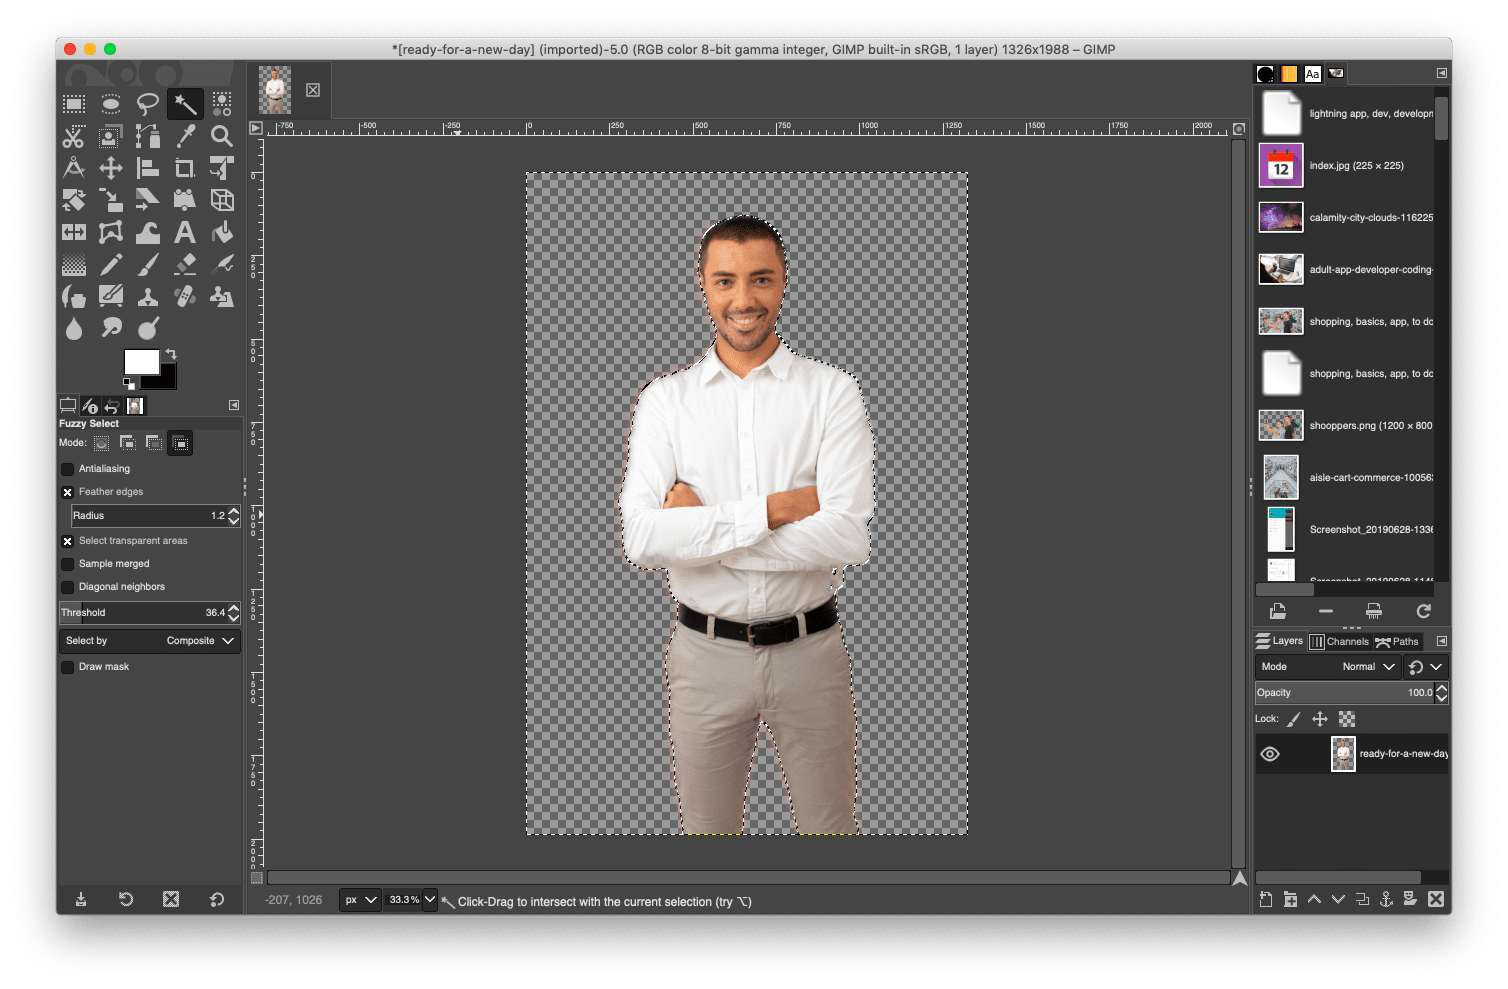 3 Easy Ways To Remove Backgrounds From Images